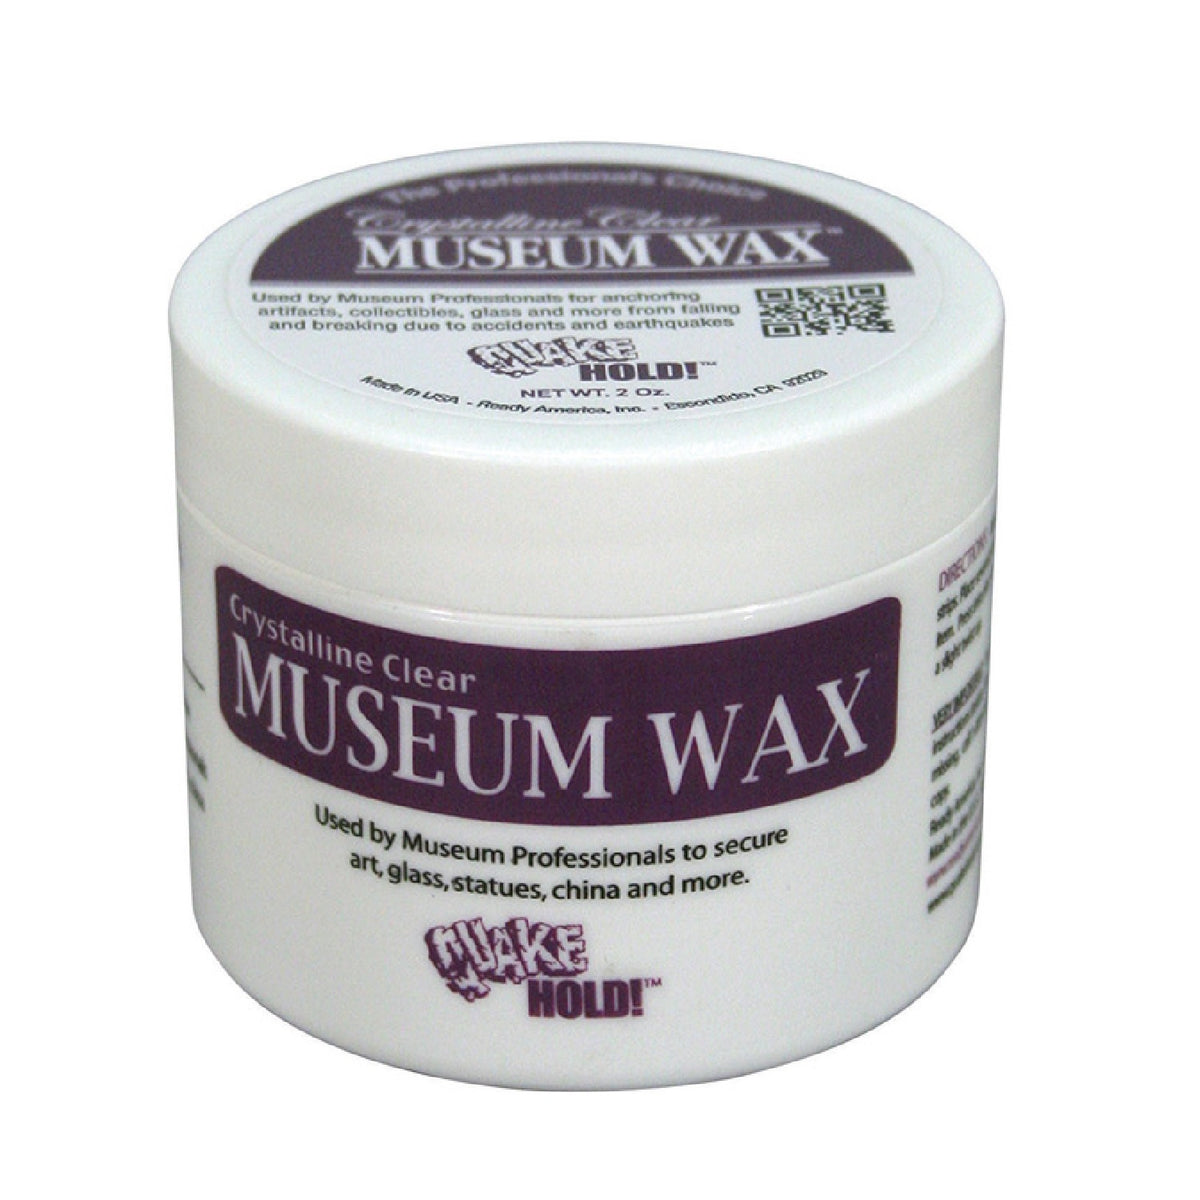 QuakeHold! 66111 Museum Wax, Crystalline Clear, 2 Oz